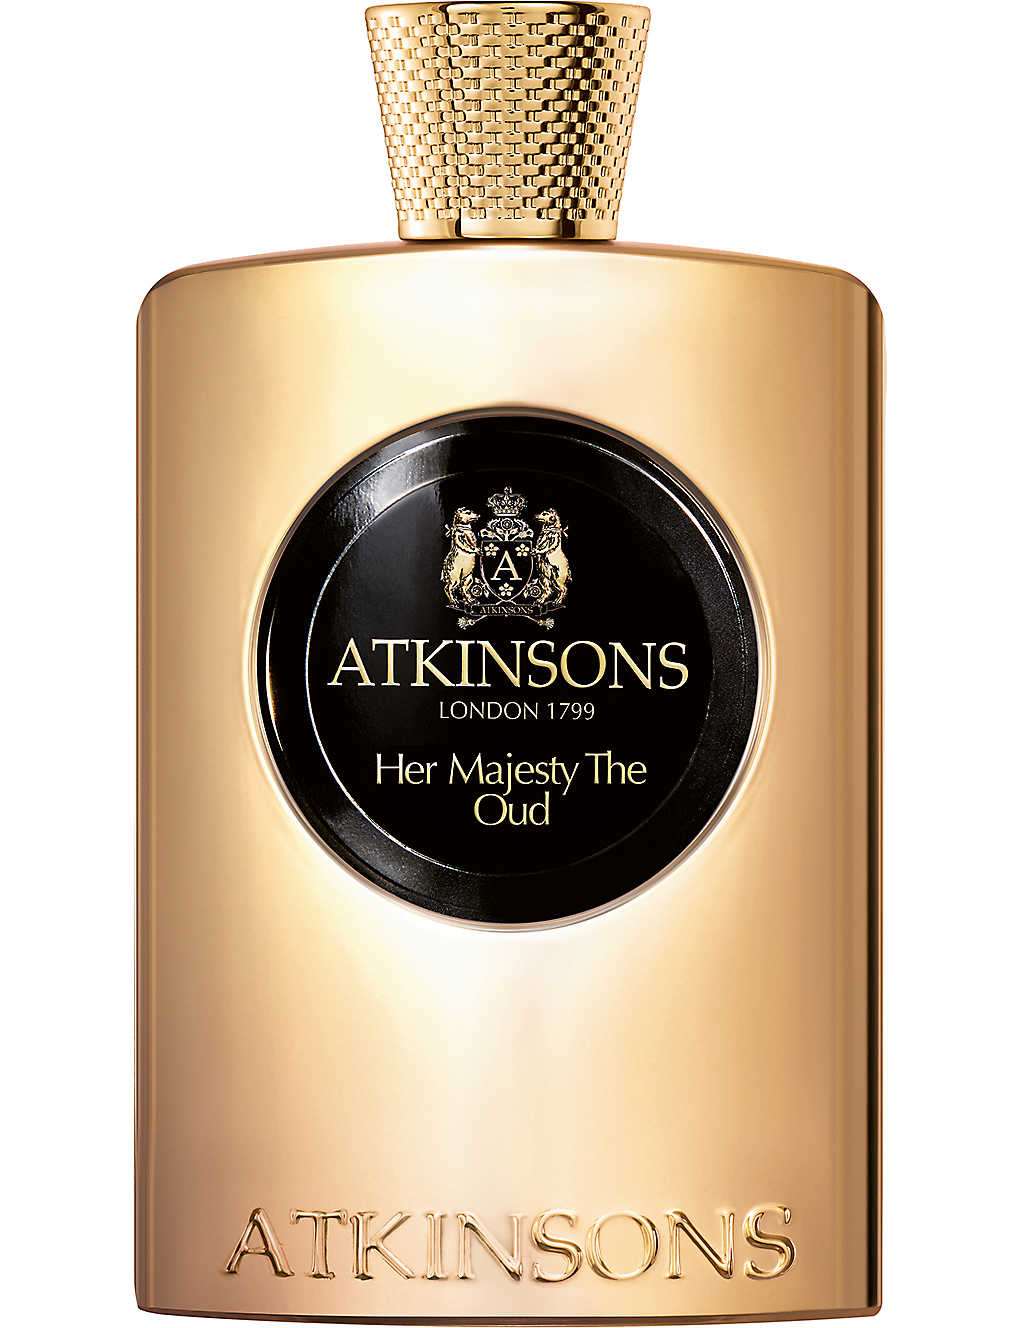 Atkinsons Her Majesty The Oud 100ml including perfume samples